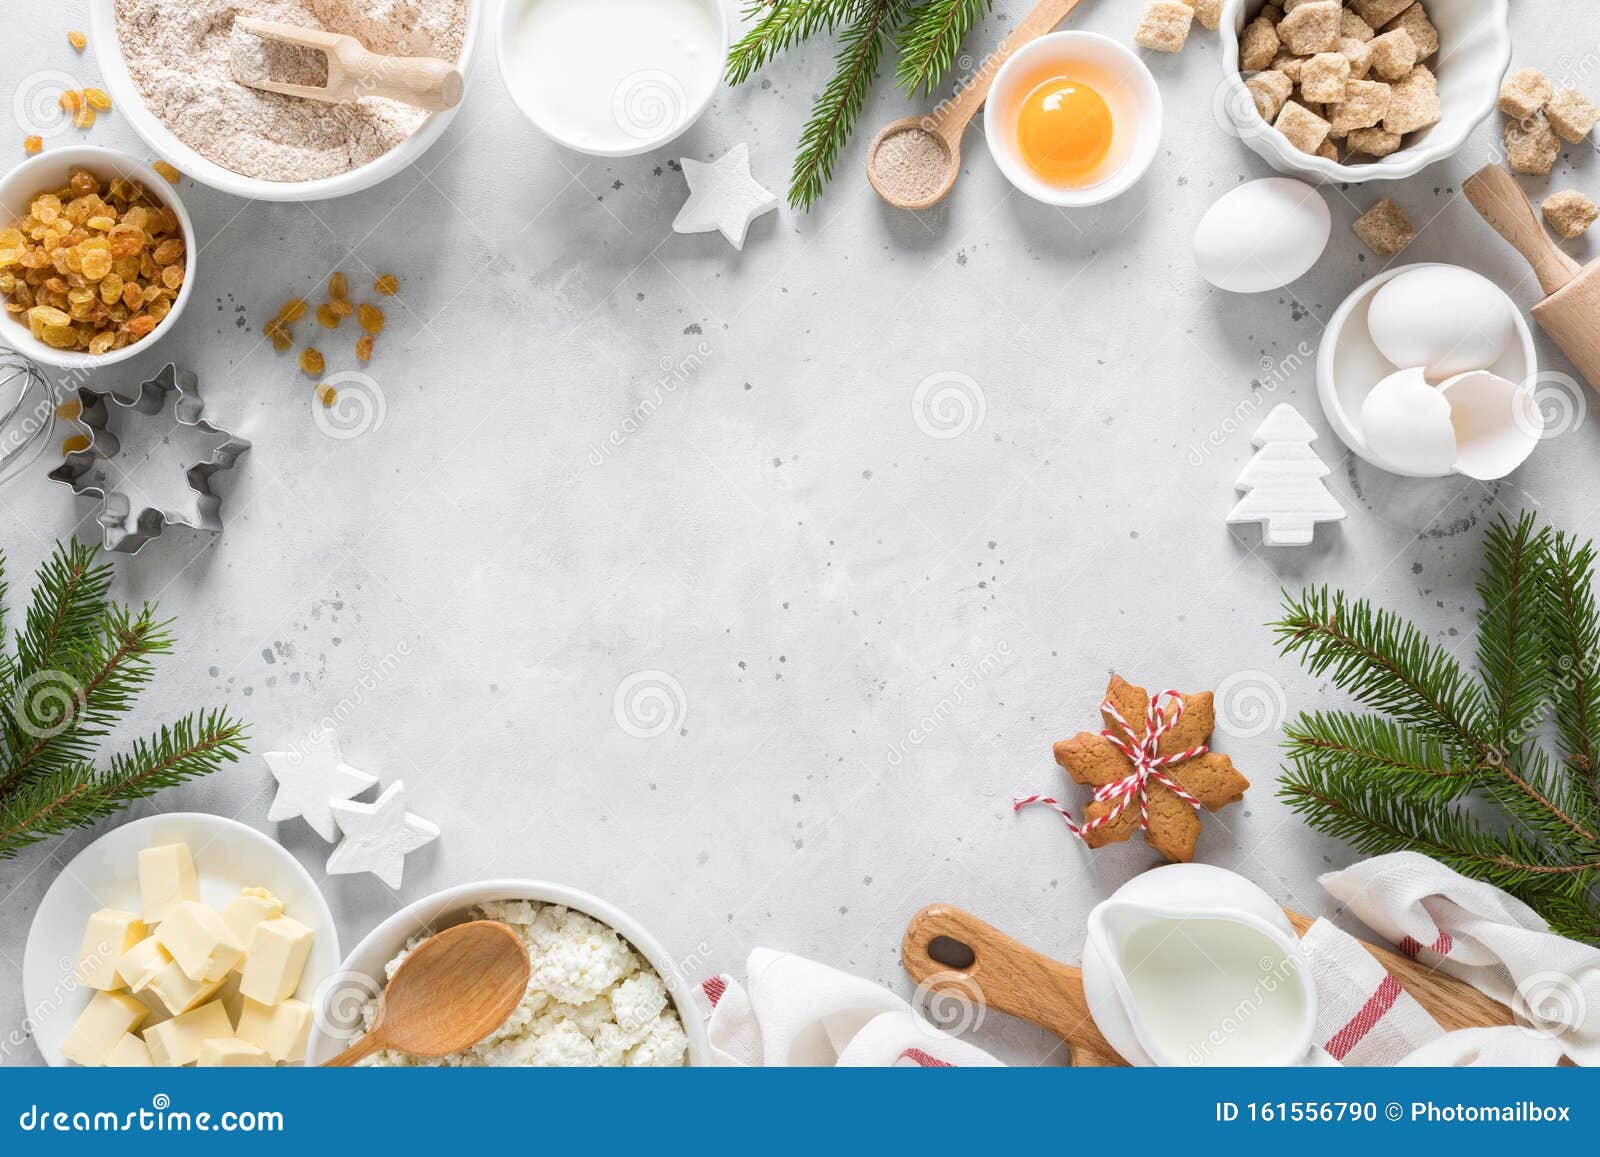 Christmas Baking Cake Background. Ingredients and Tools for Baking - Flour,  Eggs, Silicone Molds in the Shape of a Christmas Tree, Stock Photo - Image  of preparation, dough: 132694434